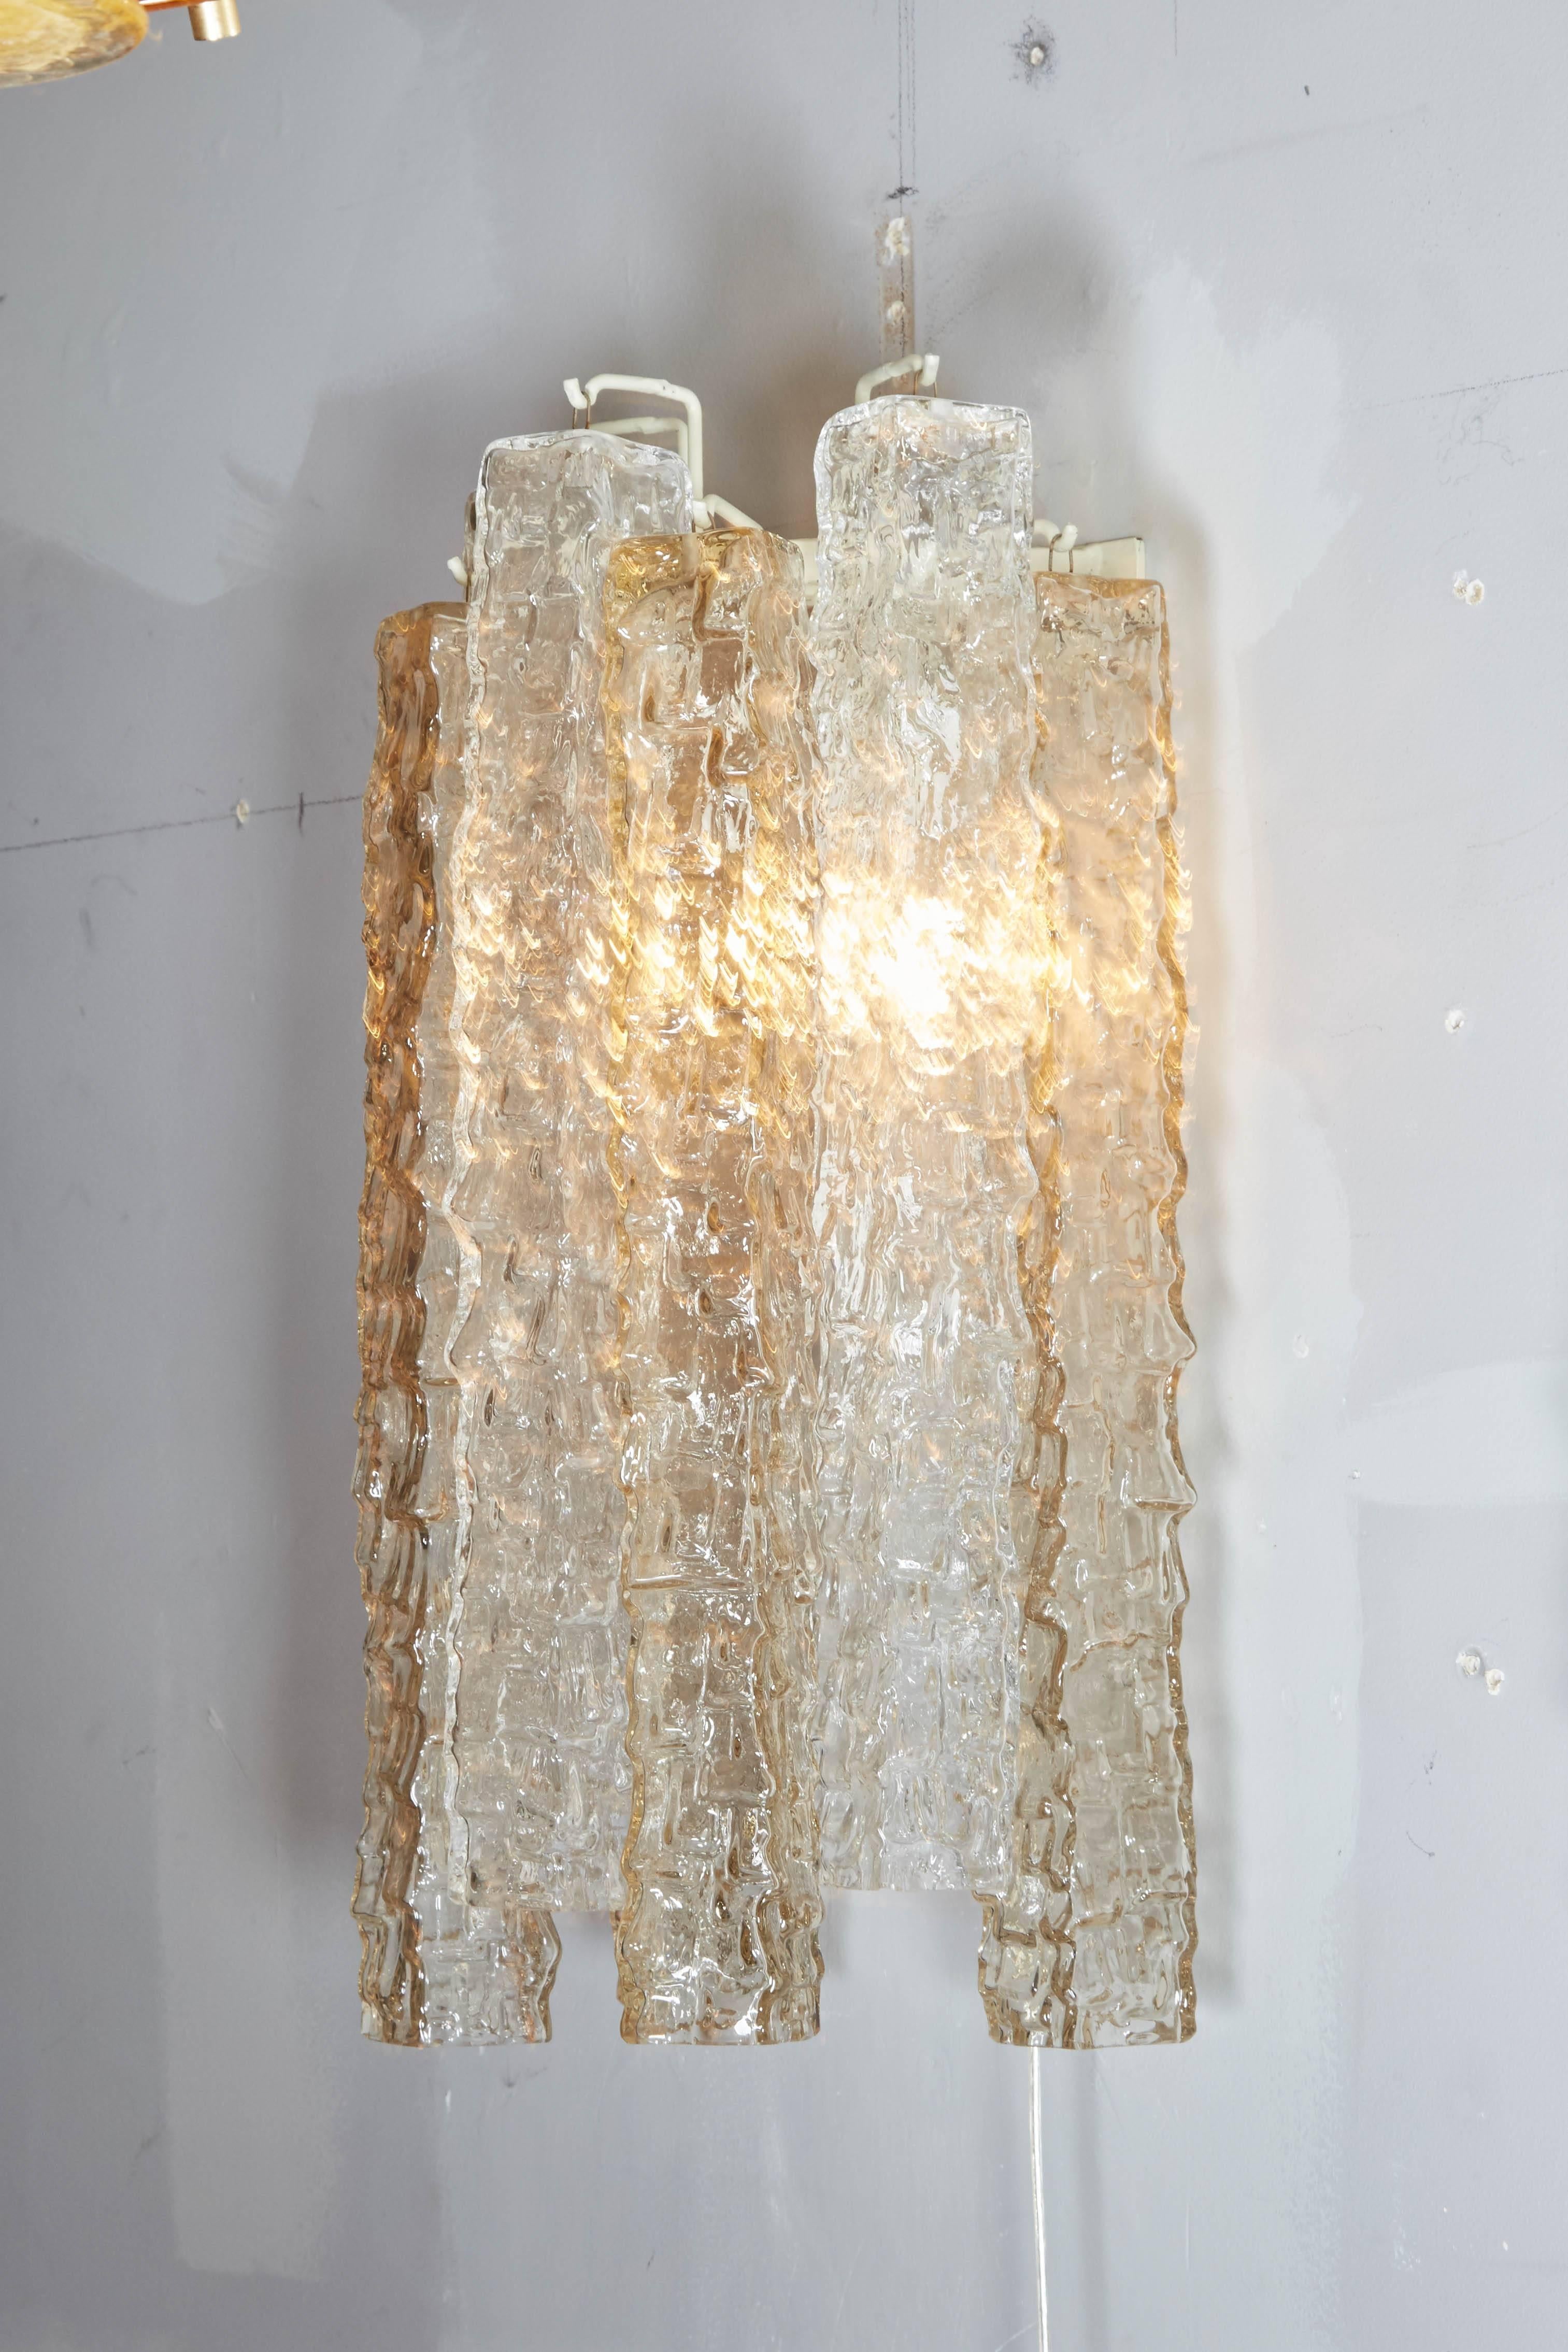 Pair of Venini smoke and clear rectangular glass sconces.